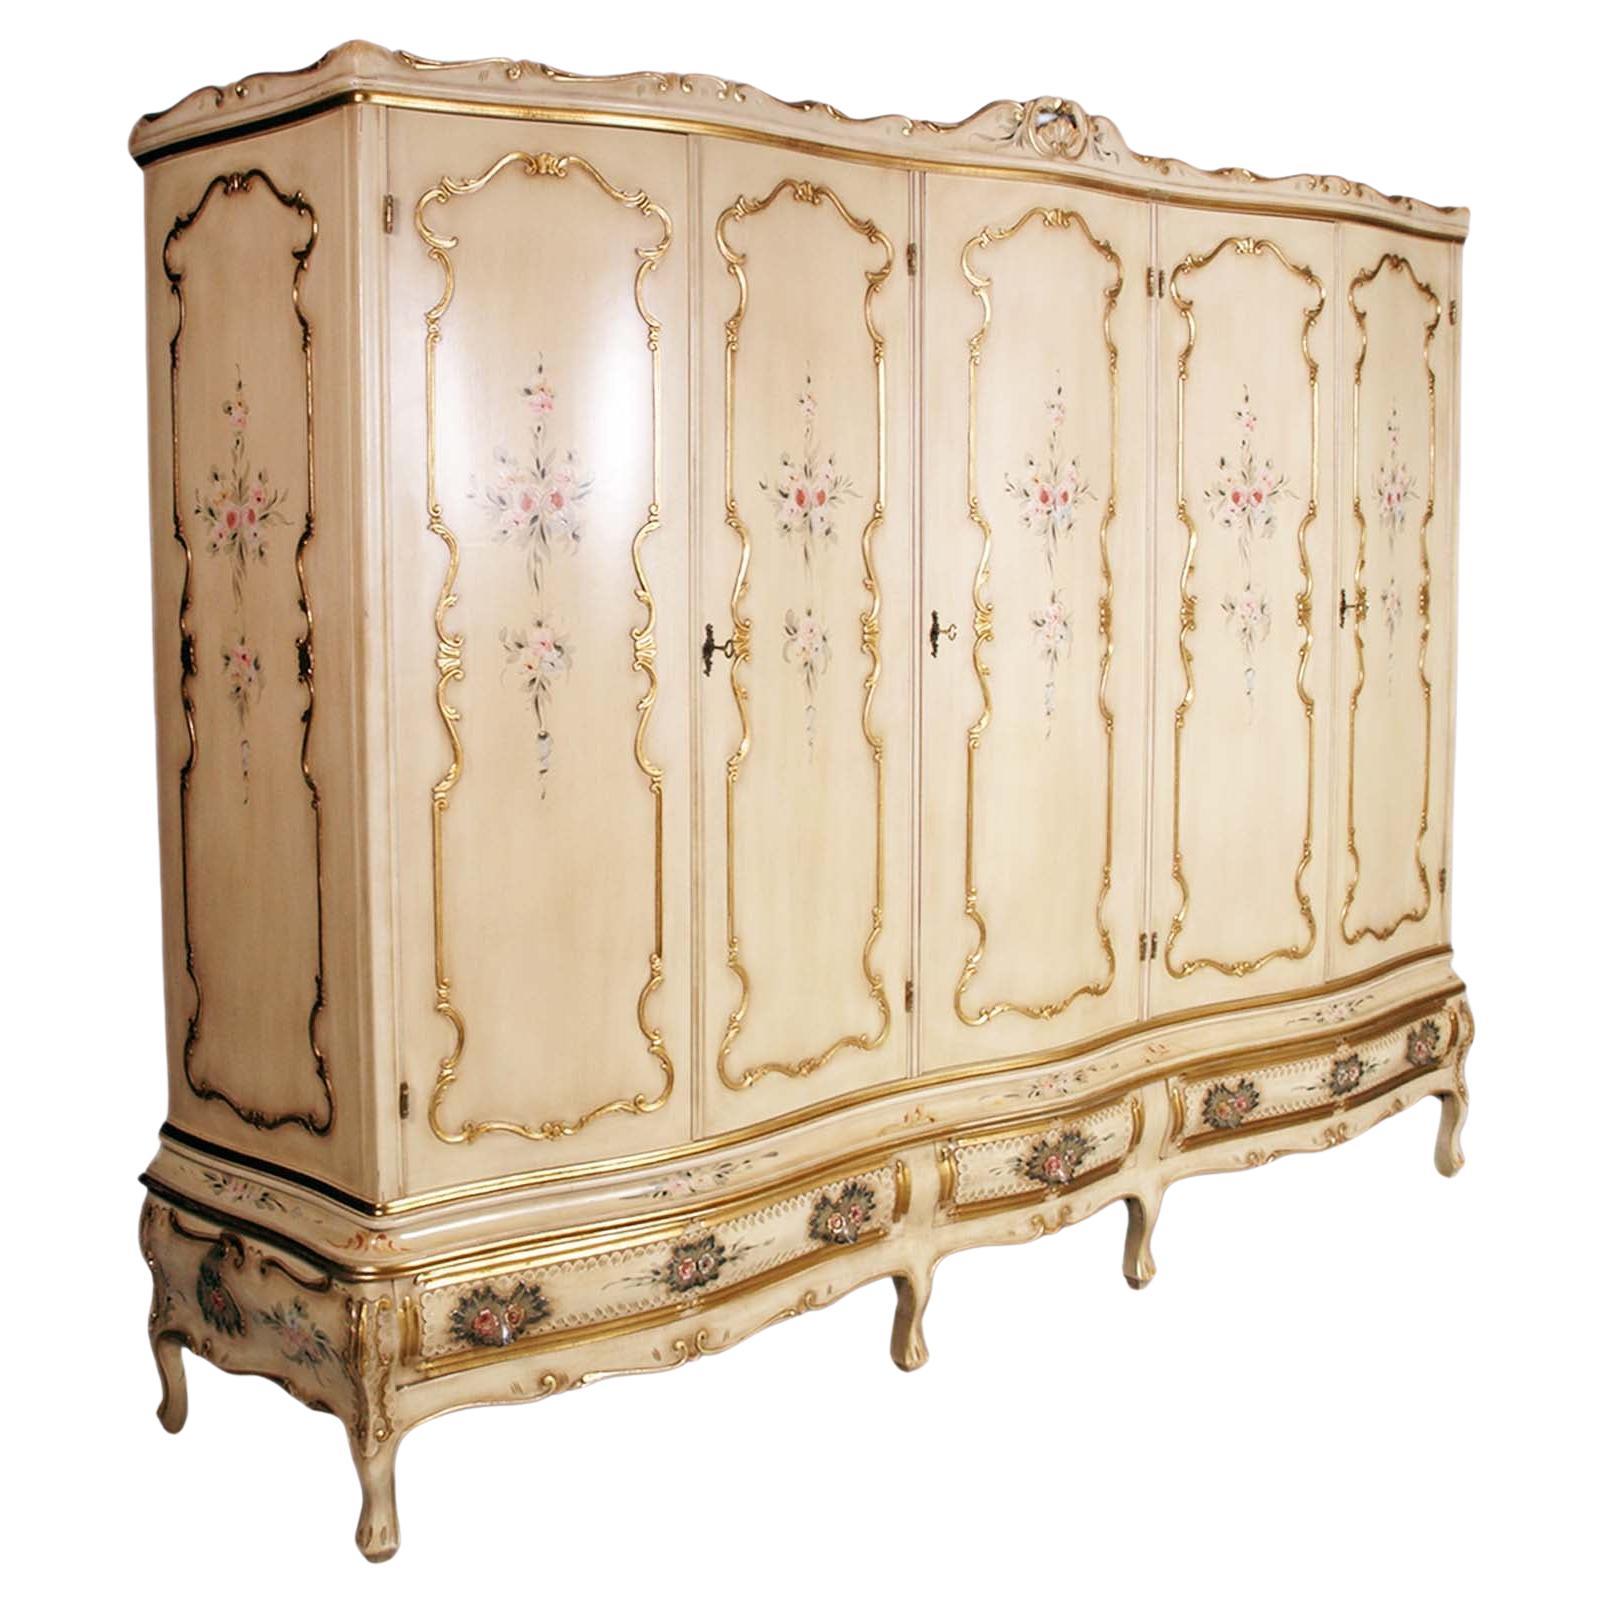 Set Mid 20th century Baroque Venetian Bedroom . Furnitures in carved, lacquered, gilded gold leaf and hand painted wood with very pleasant floral decorations. Wavy and rounded furniture equipped with smaller, larger and more capacious drawers.